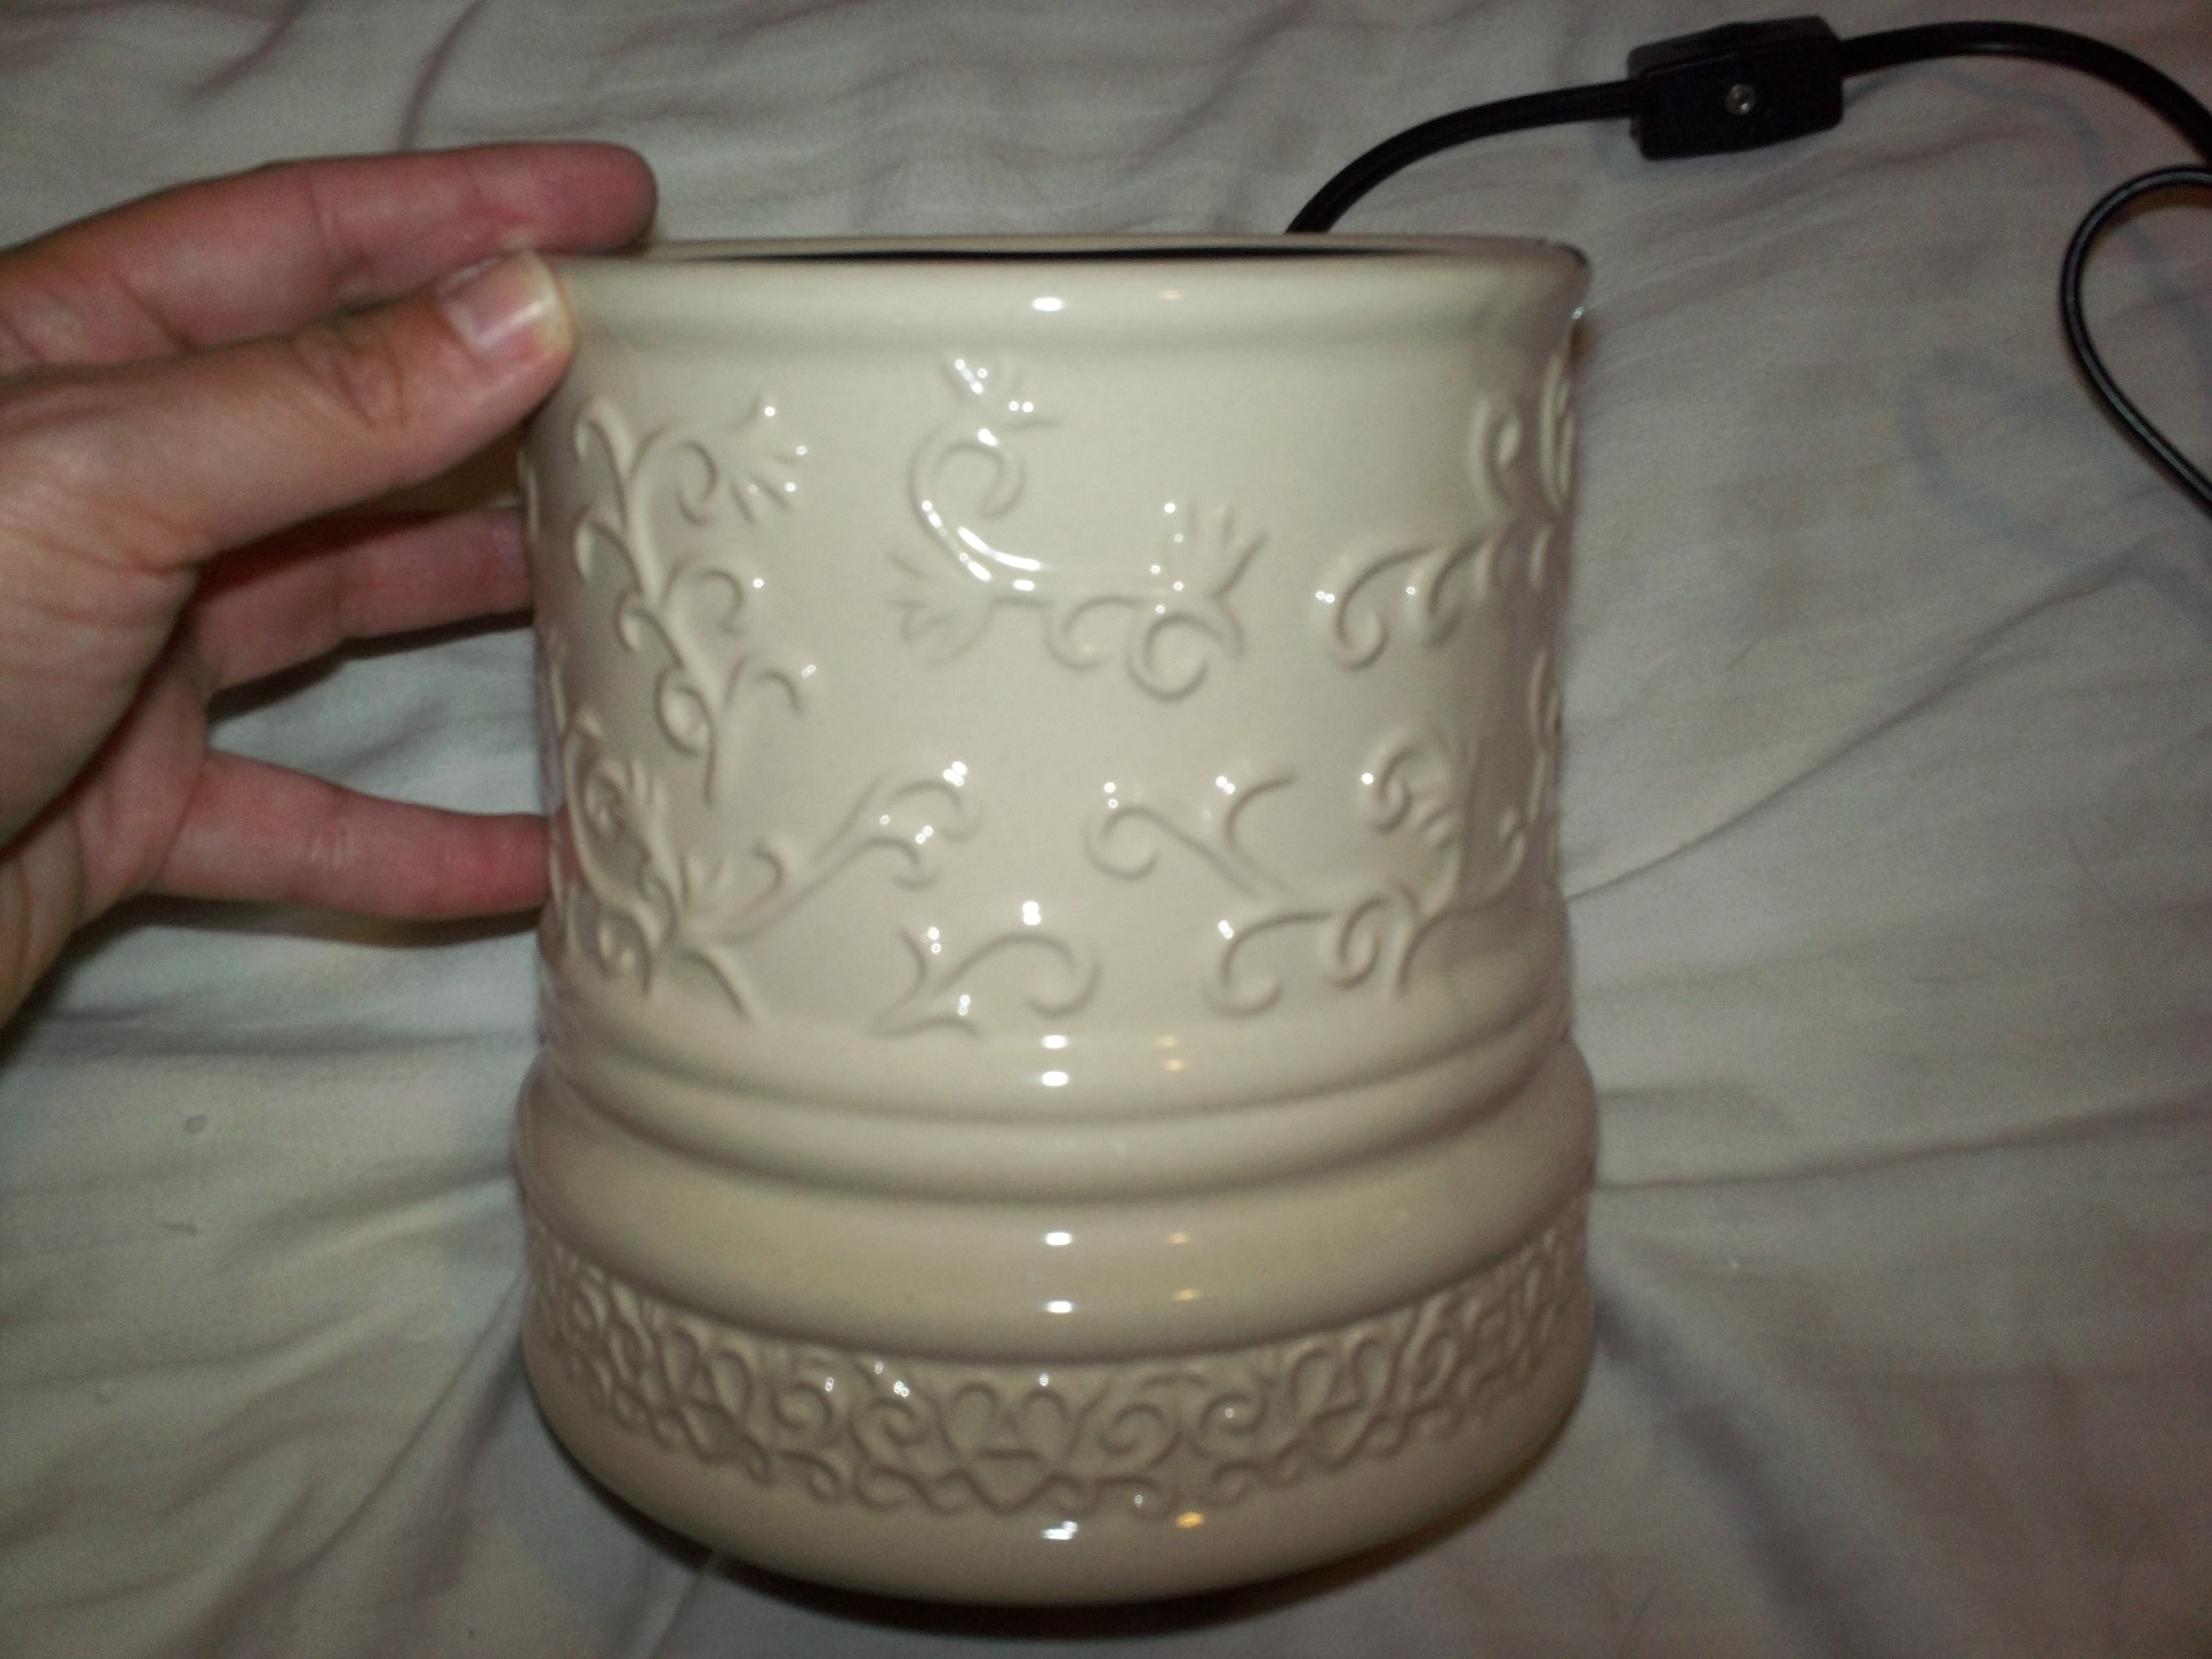 CANDLE WARMERS ETC. Home Fragrance Products ~ Review & Giveaway US 11/18